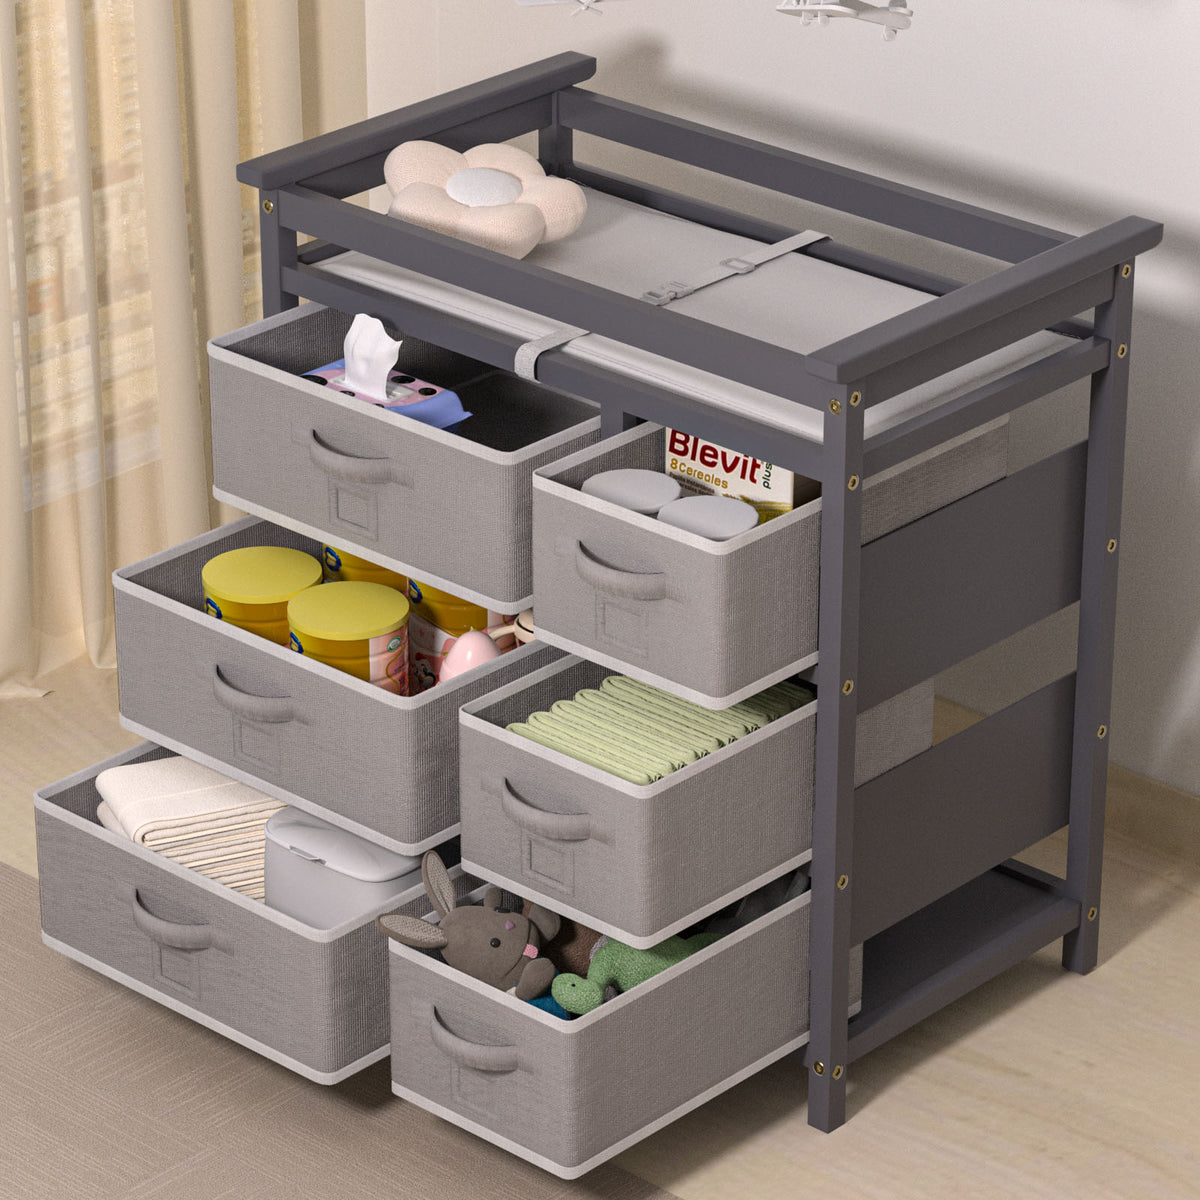 XJD Baby Changing Table with 6 Storage Baskets, Can be Used as a Changing Table Dresser with Changing Table Top, a Baby Changing Station, Diaper Changing Station (Gray/Grey)